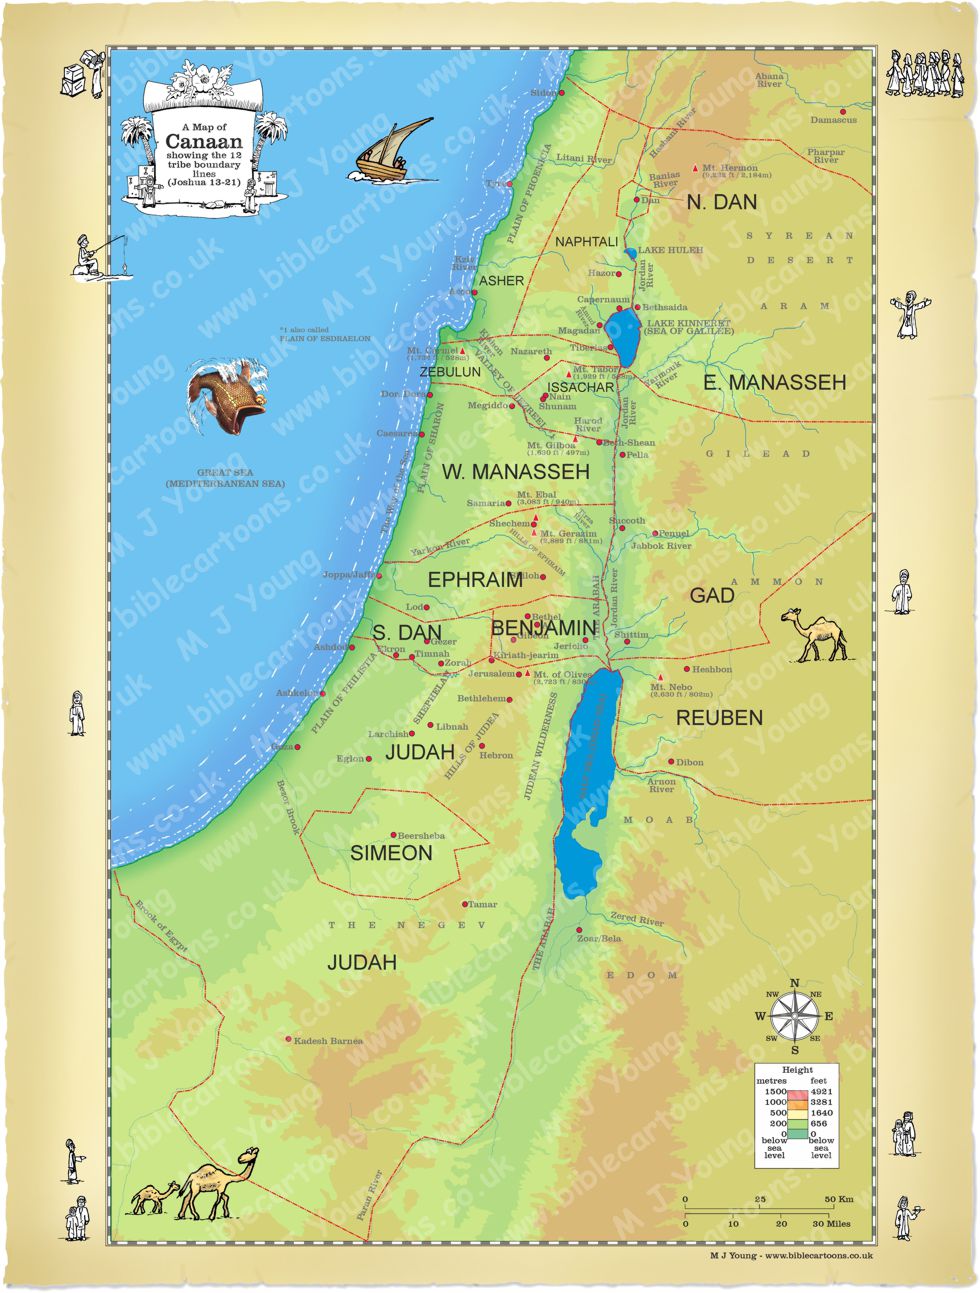 Map of Canaan showing the 12 tribes boundary lines | Bible Cartoons